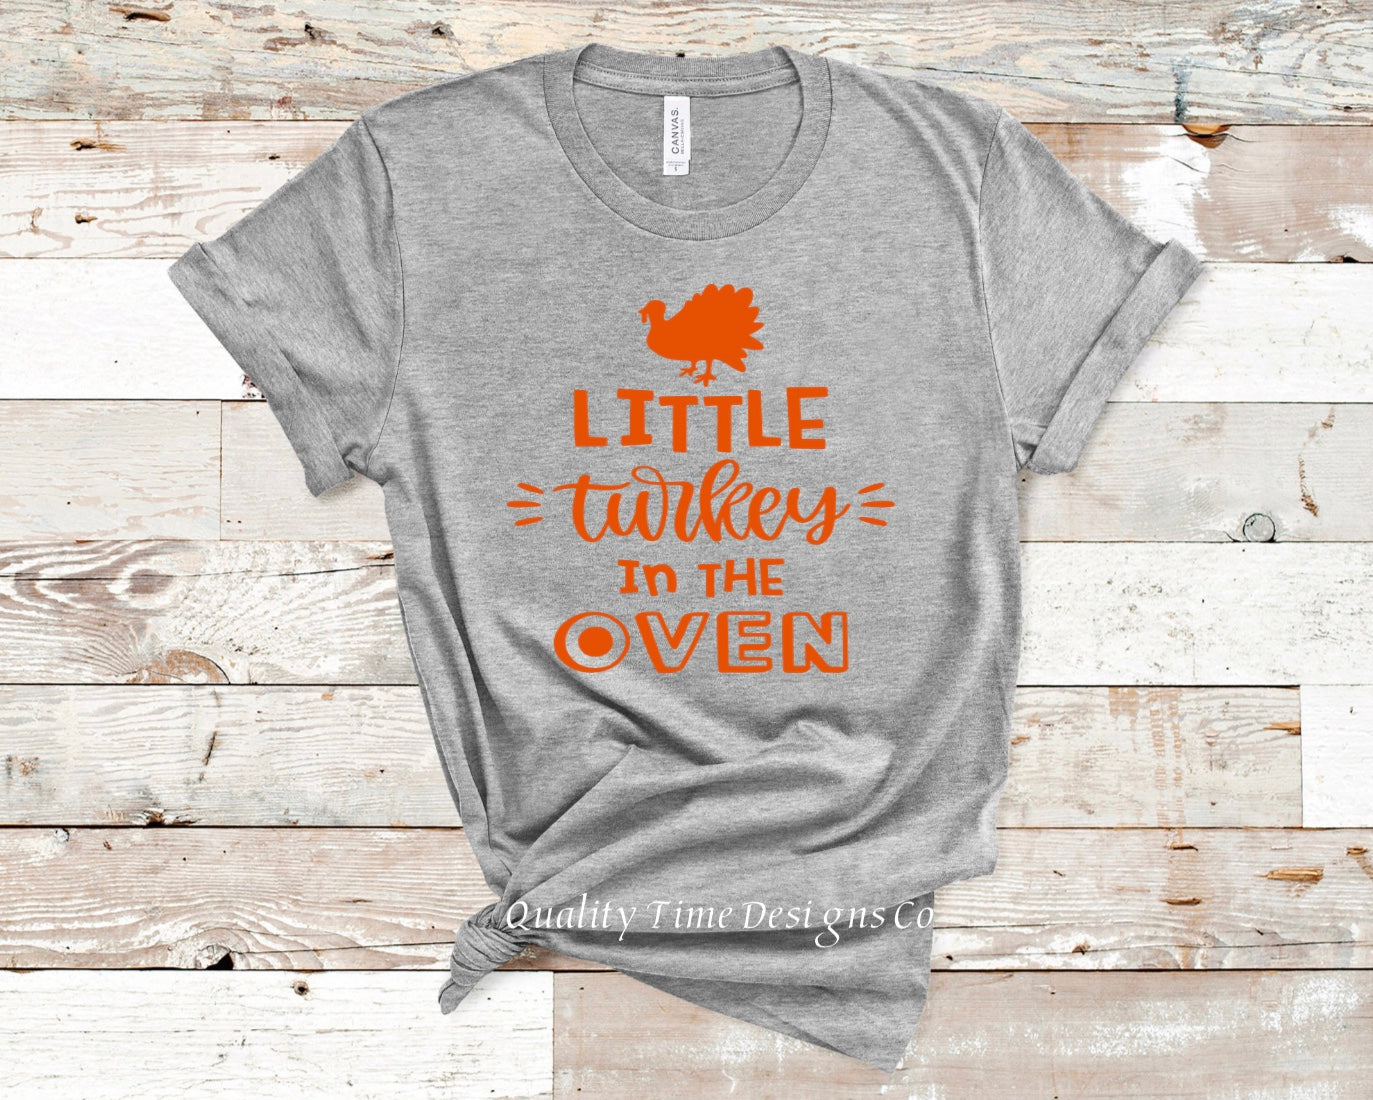 Little Turkey in the Oven t-shirt 